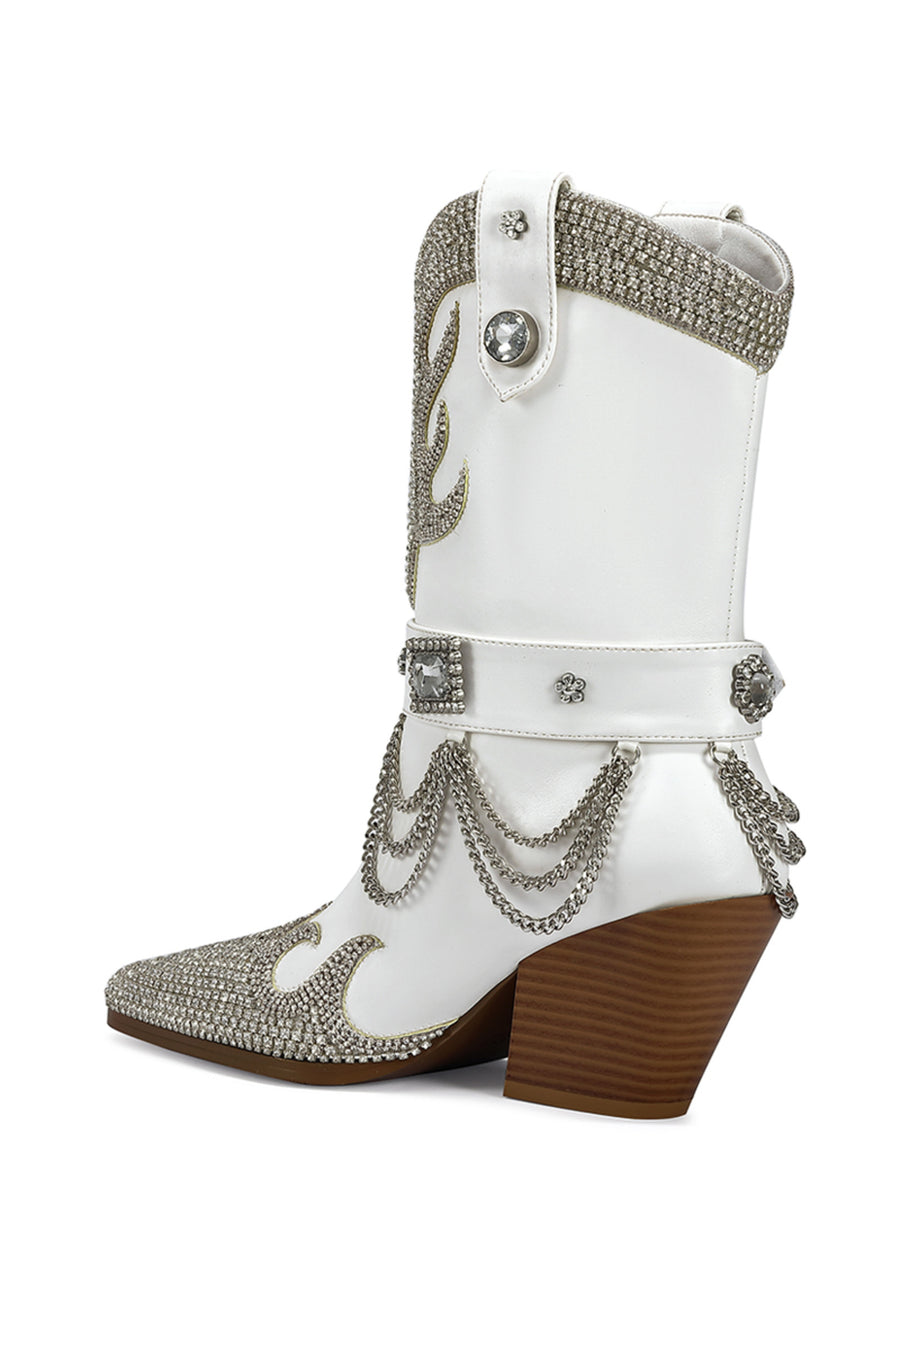 White statement western boot with crystal rhinestone embellished Western pattern and silver chain draping